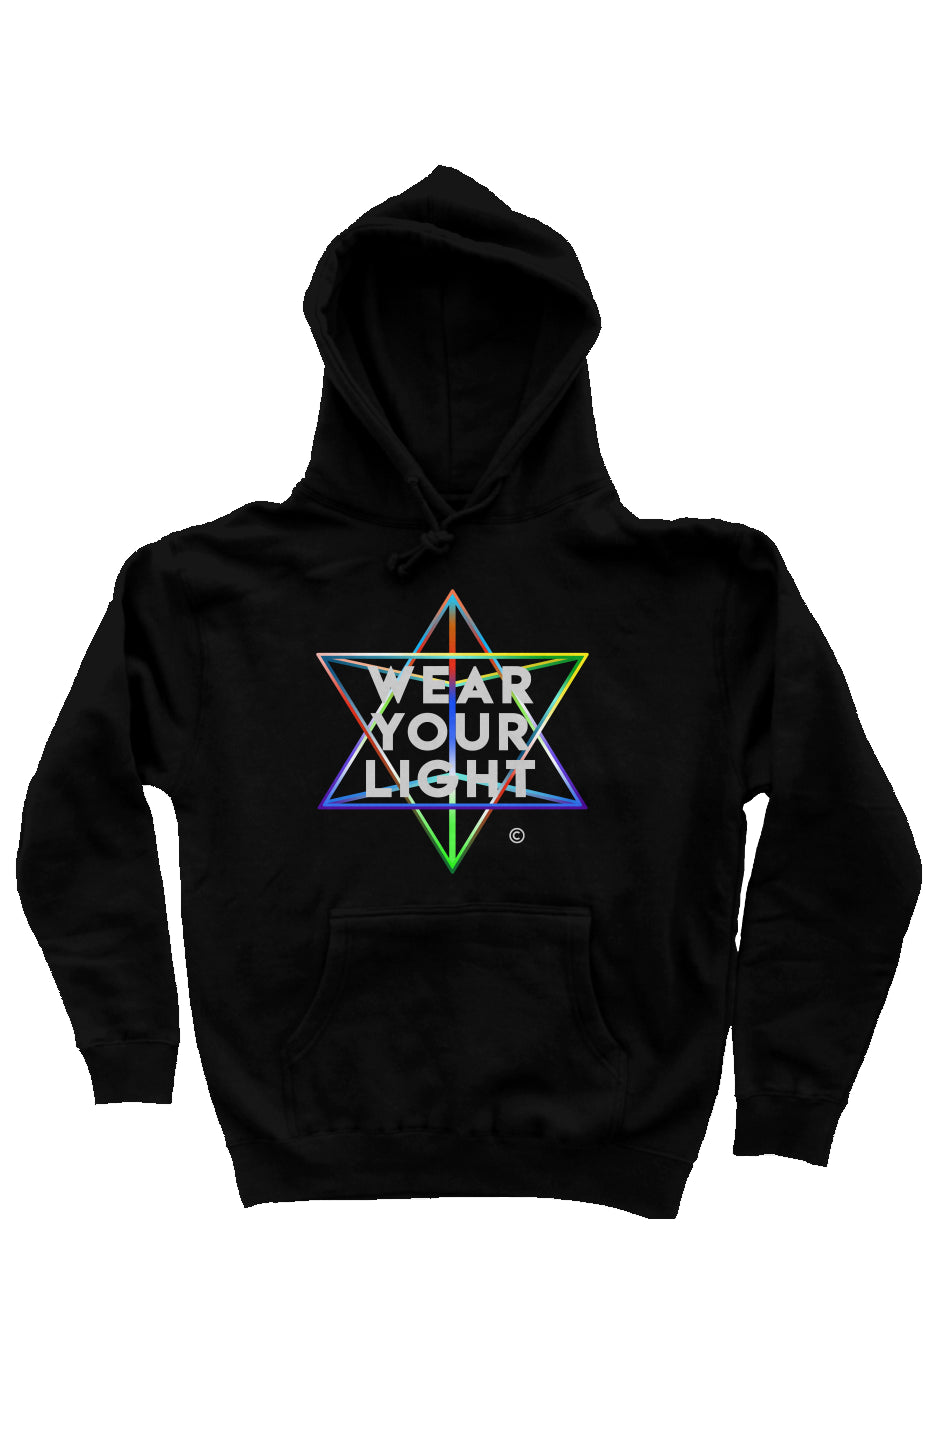 the wyl collection: unisex pullover hoodies